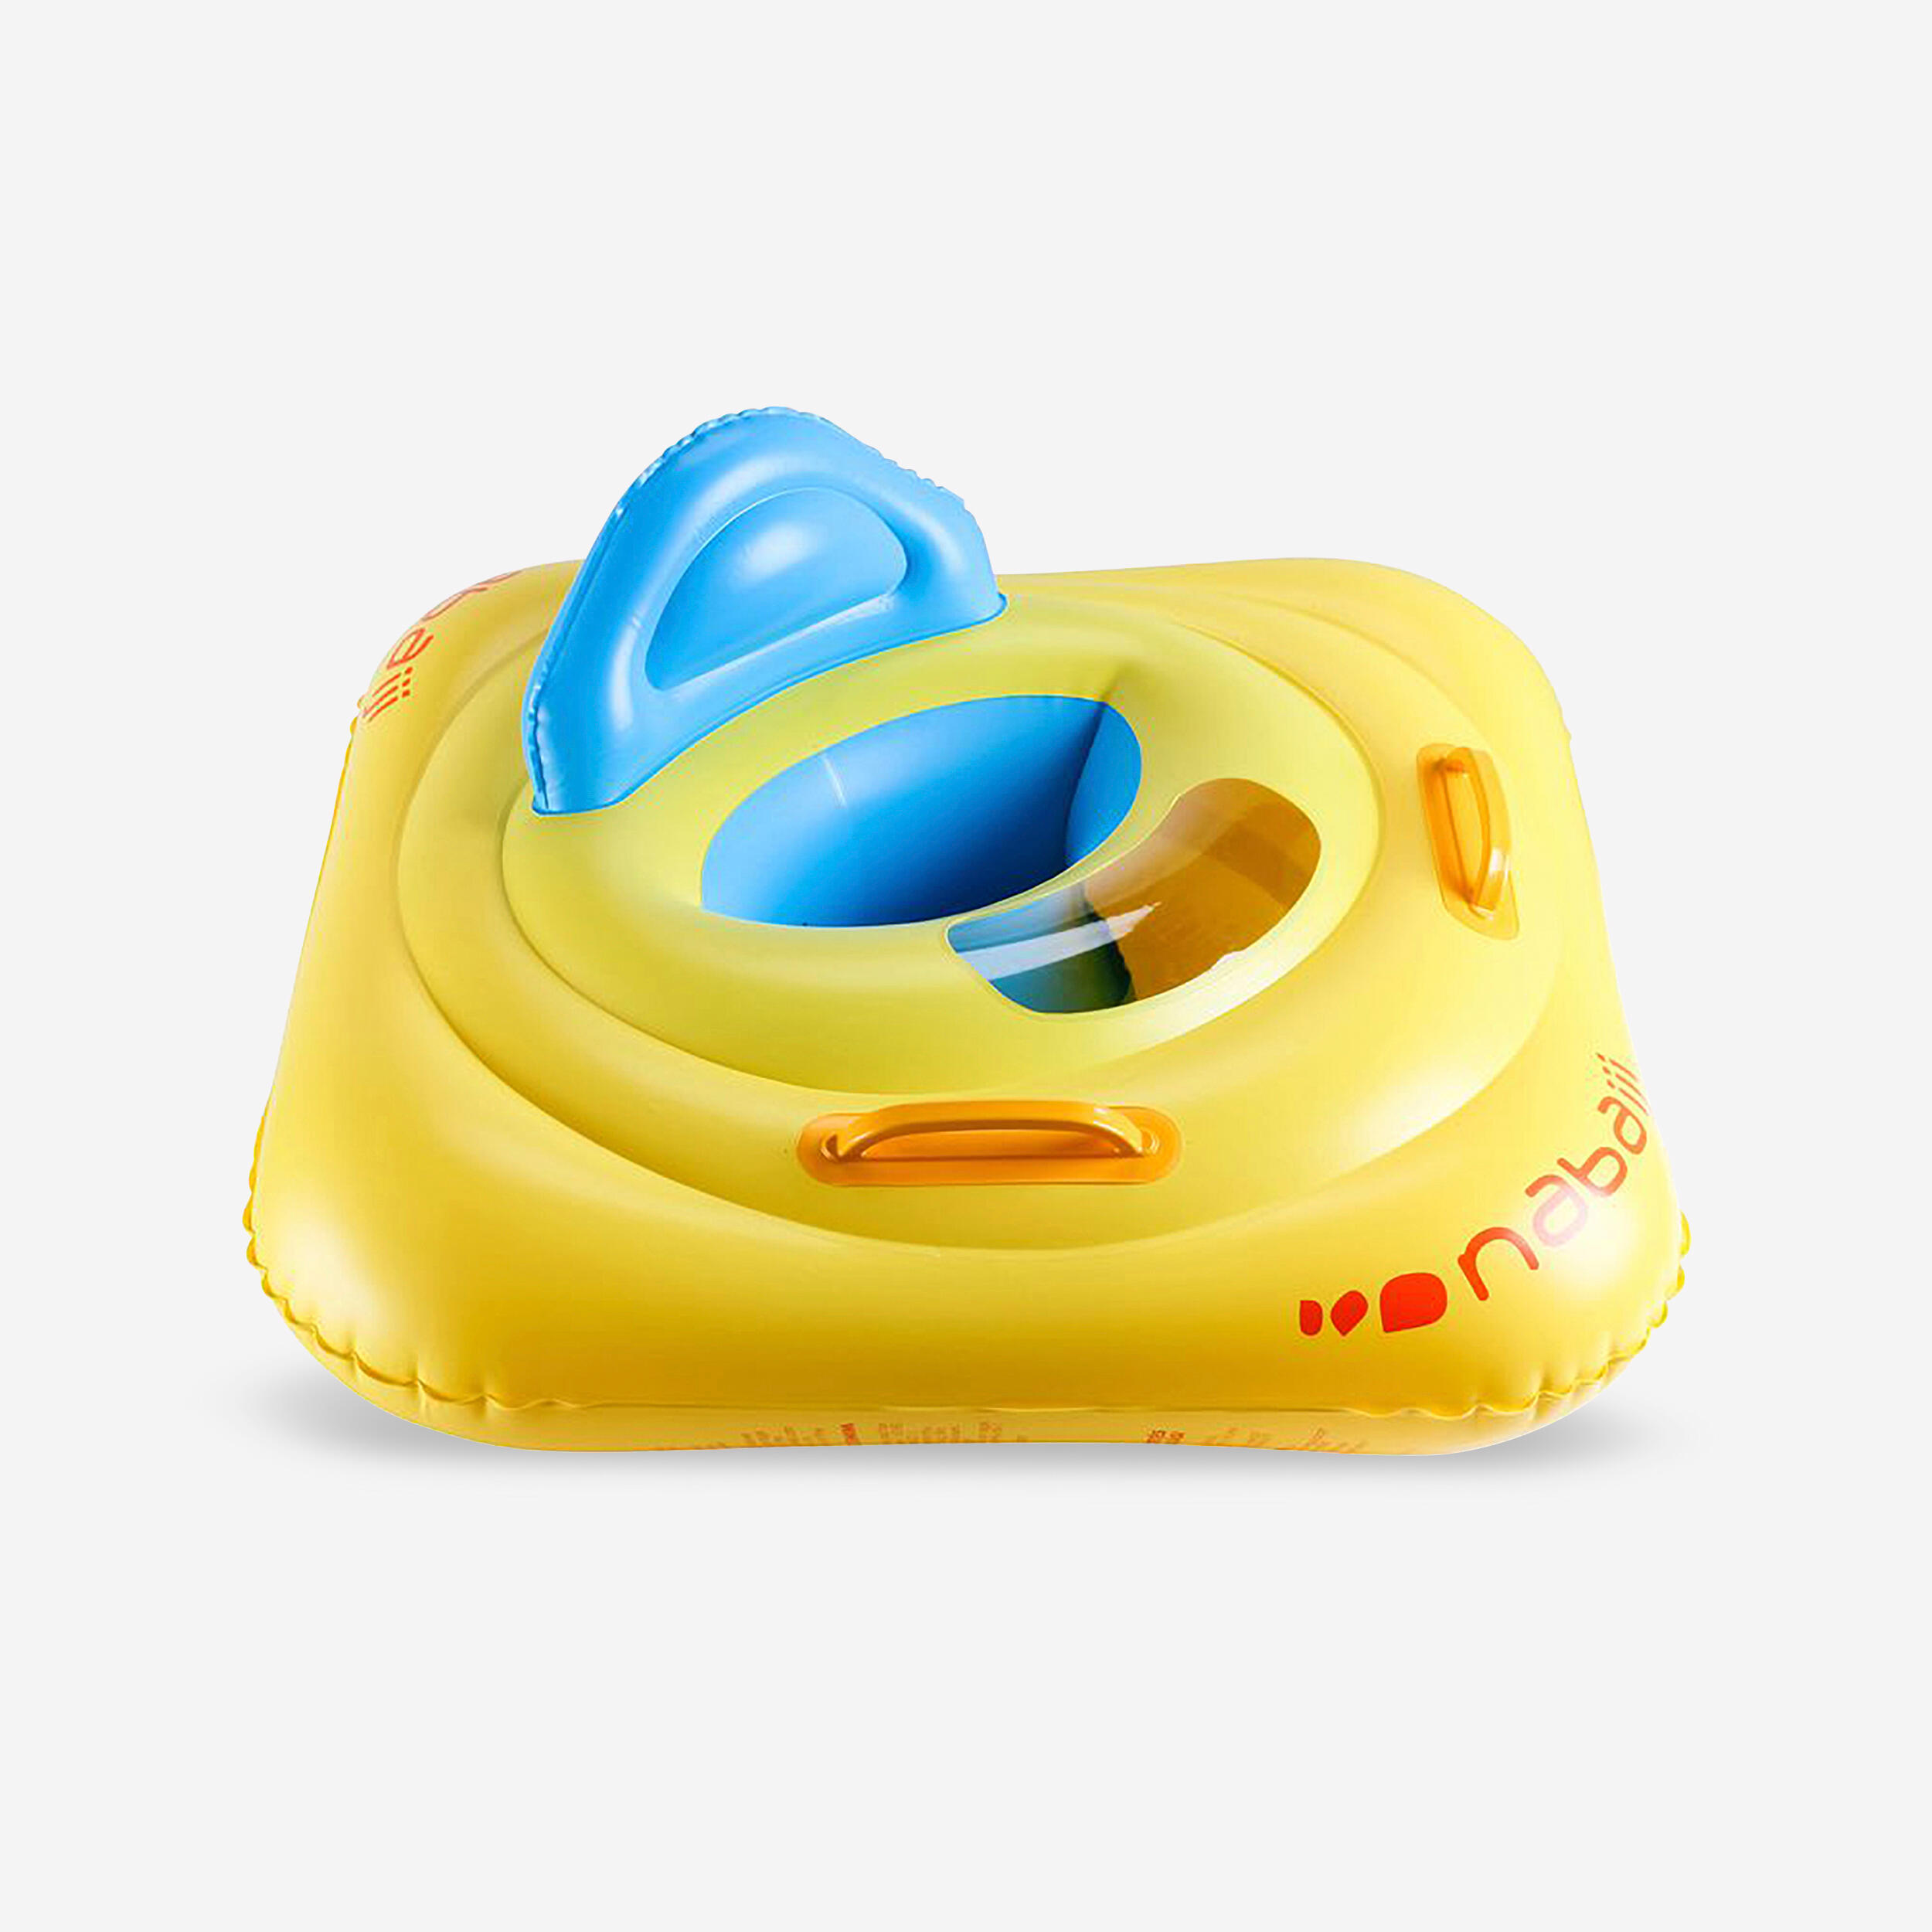 NABAIJI Inflatable baby seat buoy for swimming pool with porthole with handles 7-11 kg